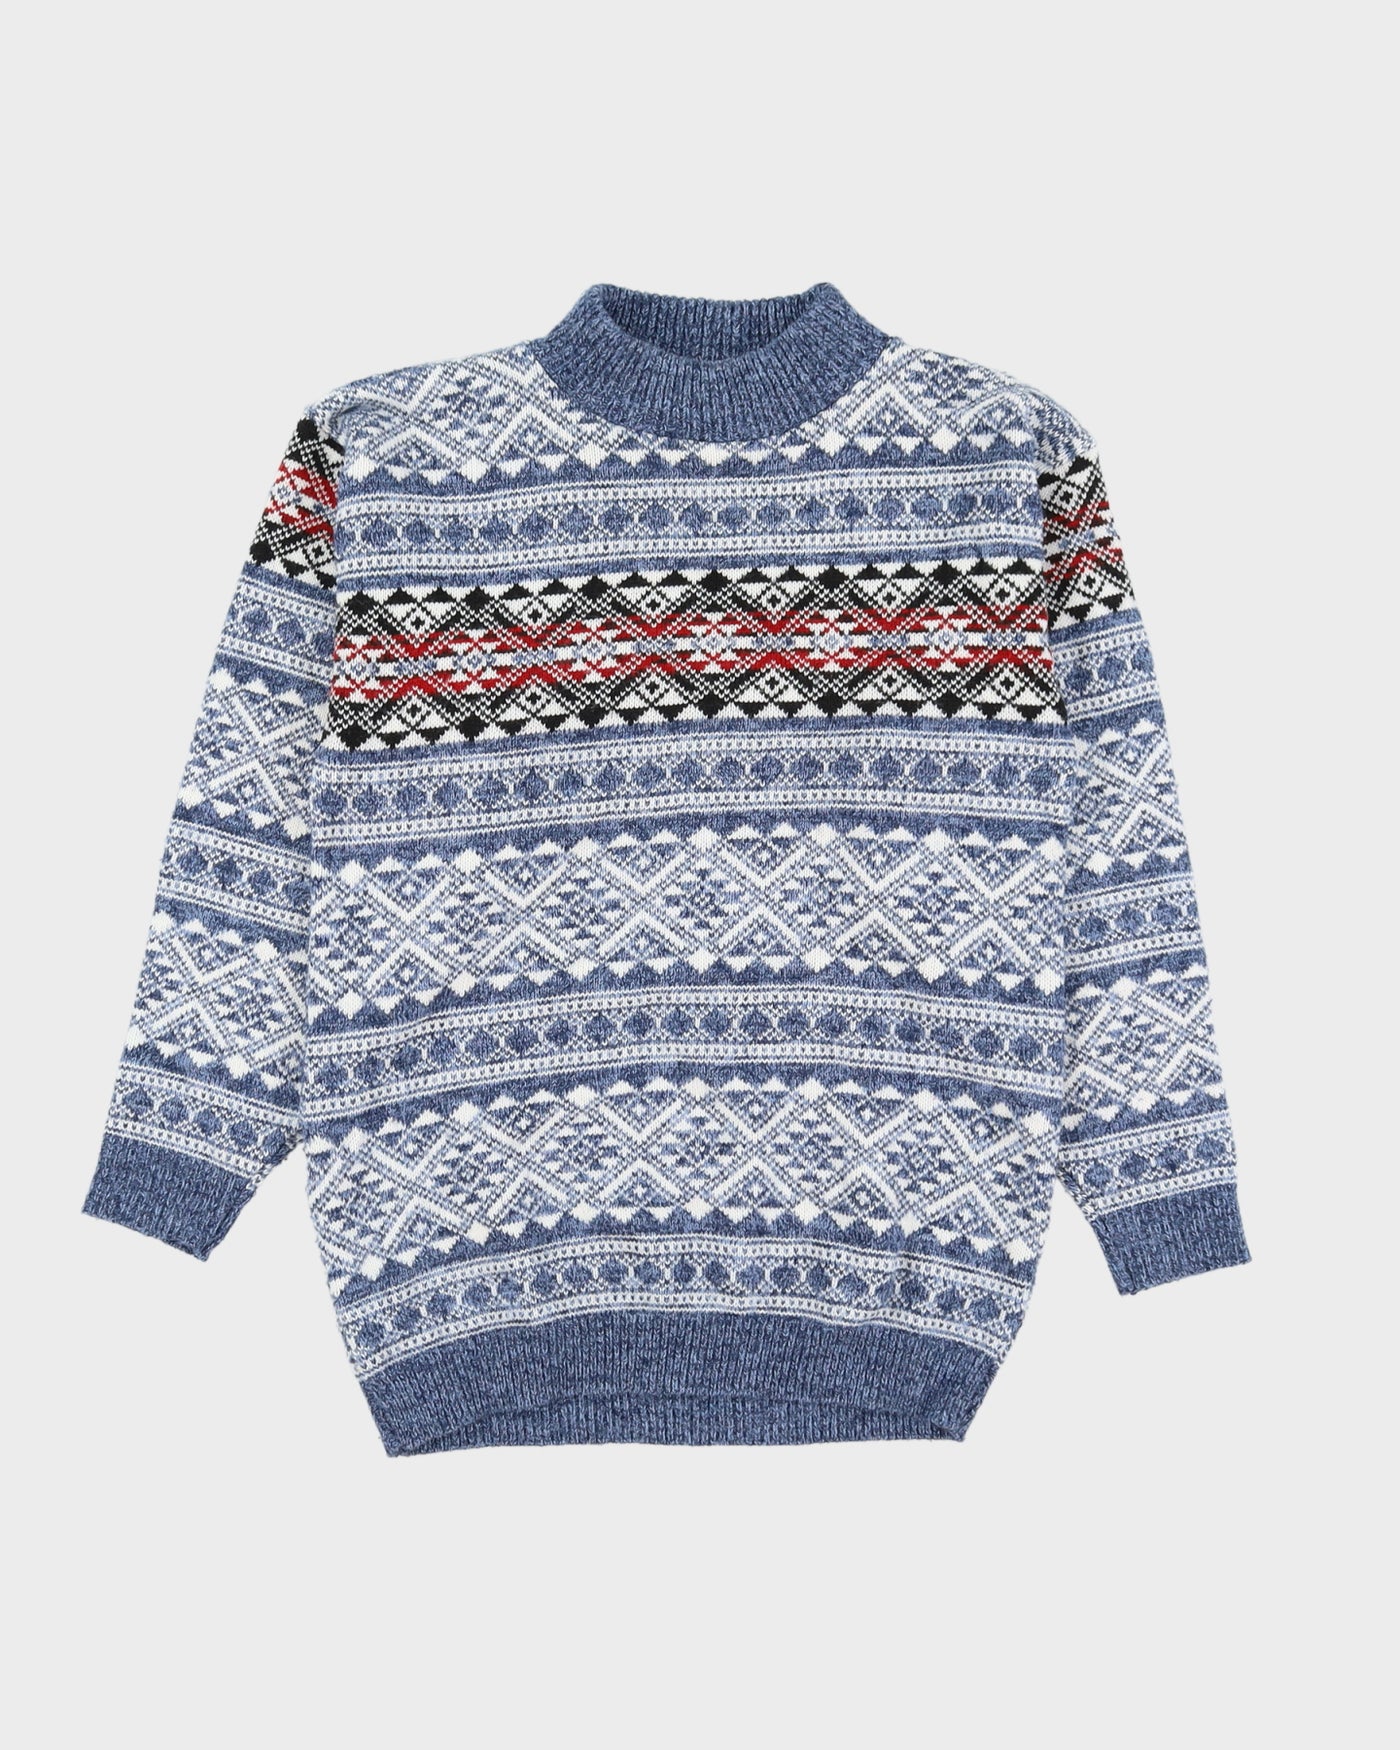 Blue Patterned Knitted Jumper - S